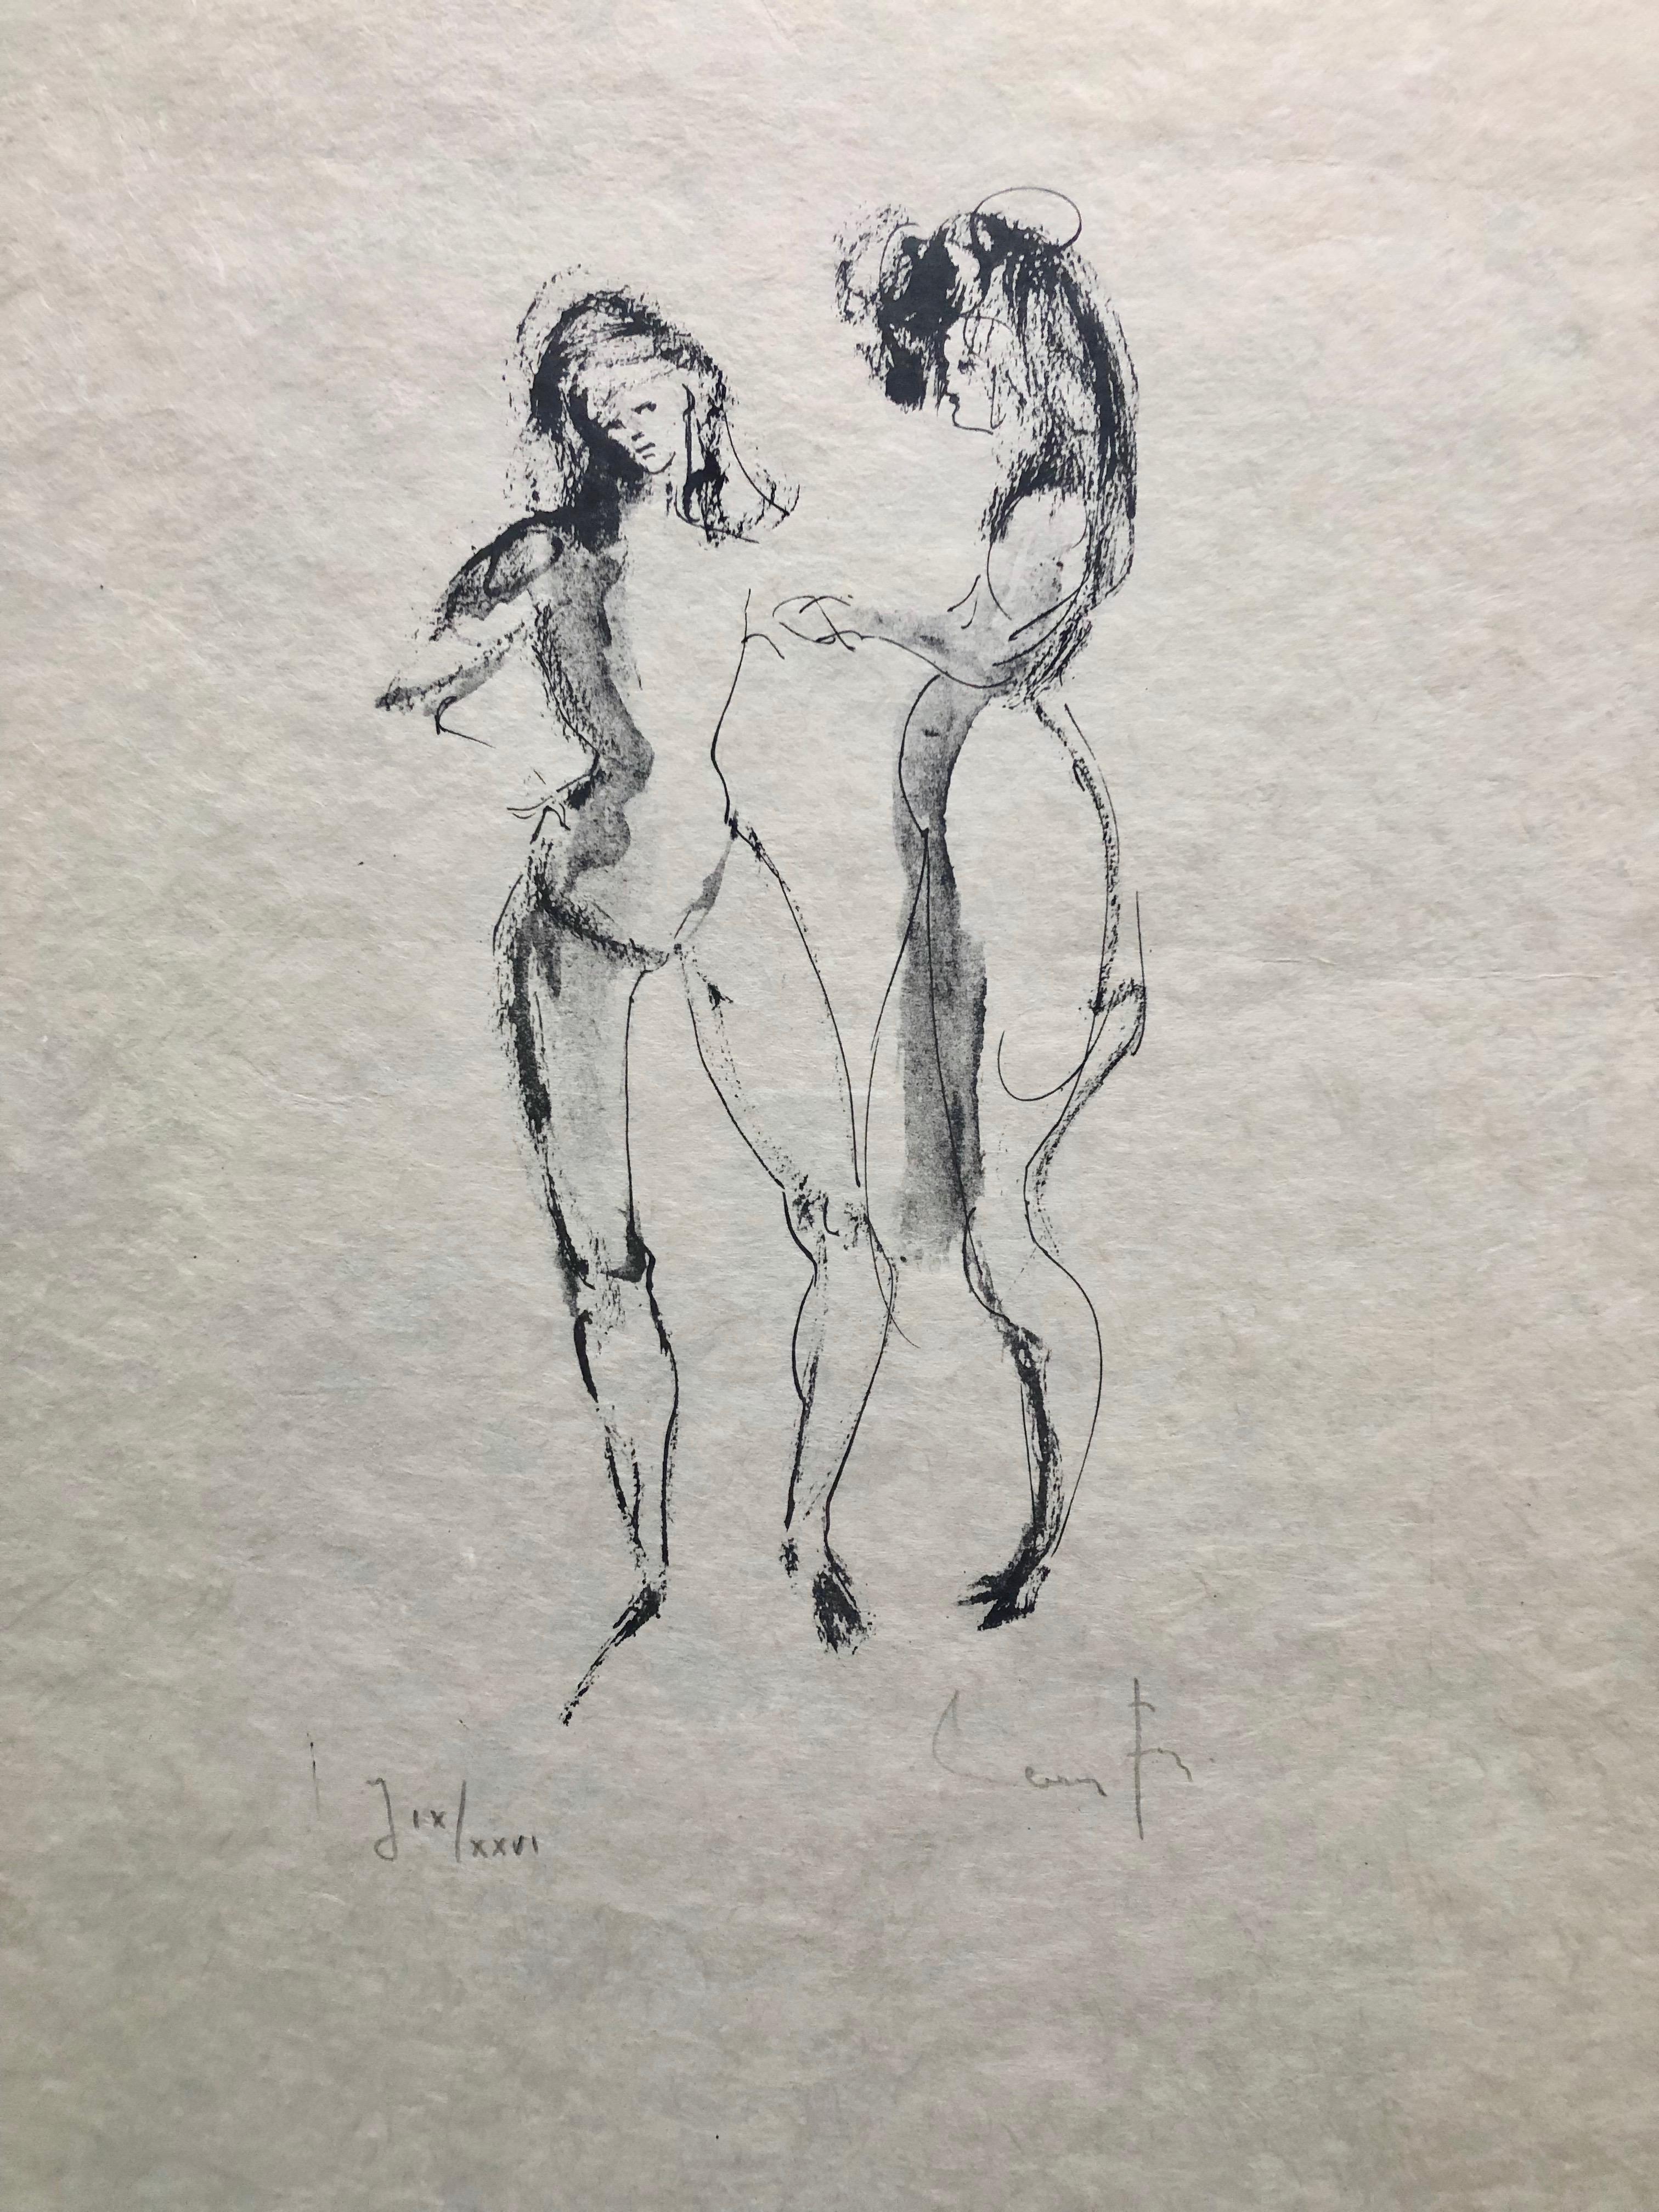 This is a lovely framed, signed etching by artist Leonor Fini. The subject is of two naked women talking. It is in a complimentary black frame size 26.75 x 20.4 inches. Leonor Fini (1907- 1996) is considered one of the most important women artists